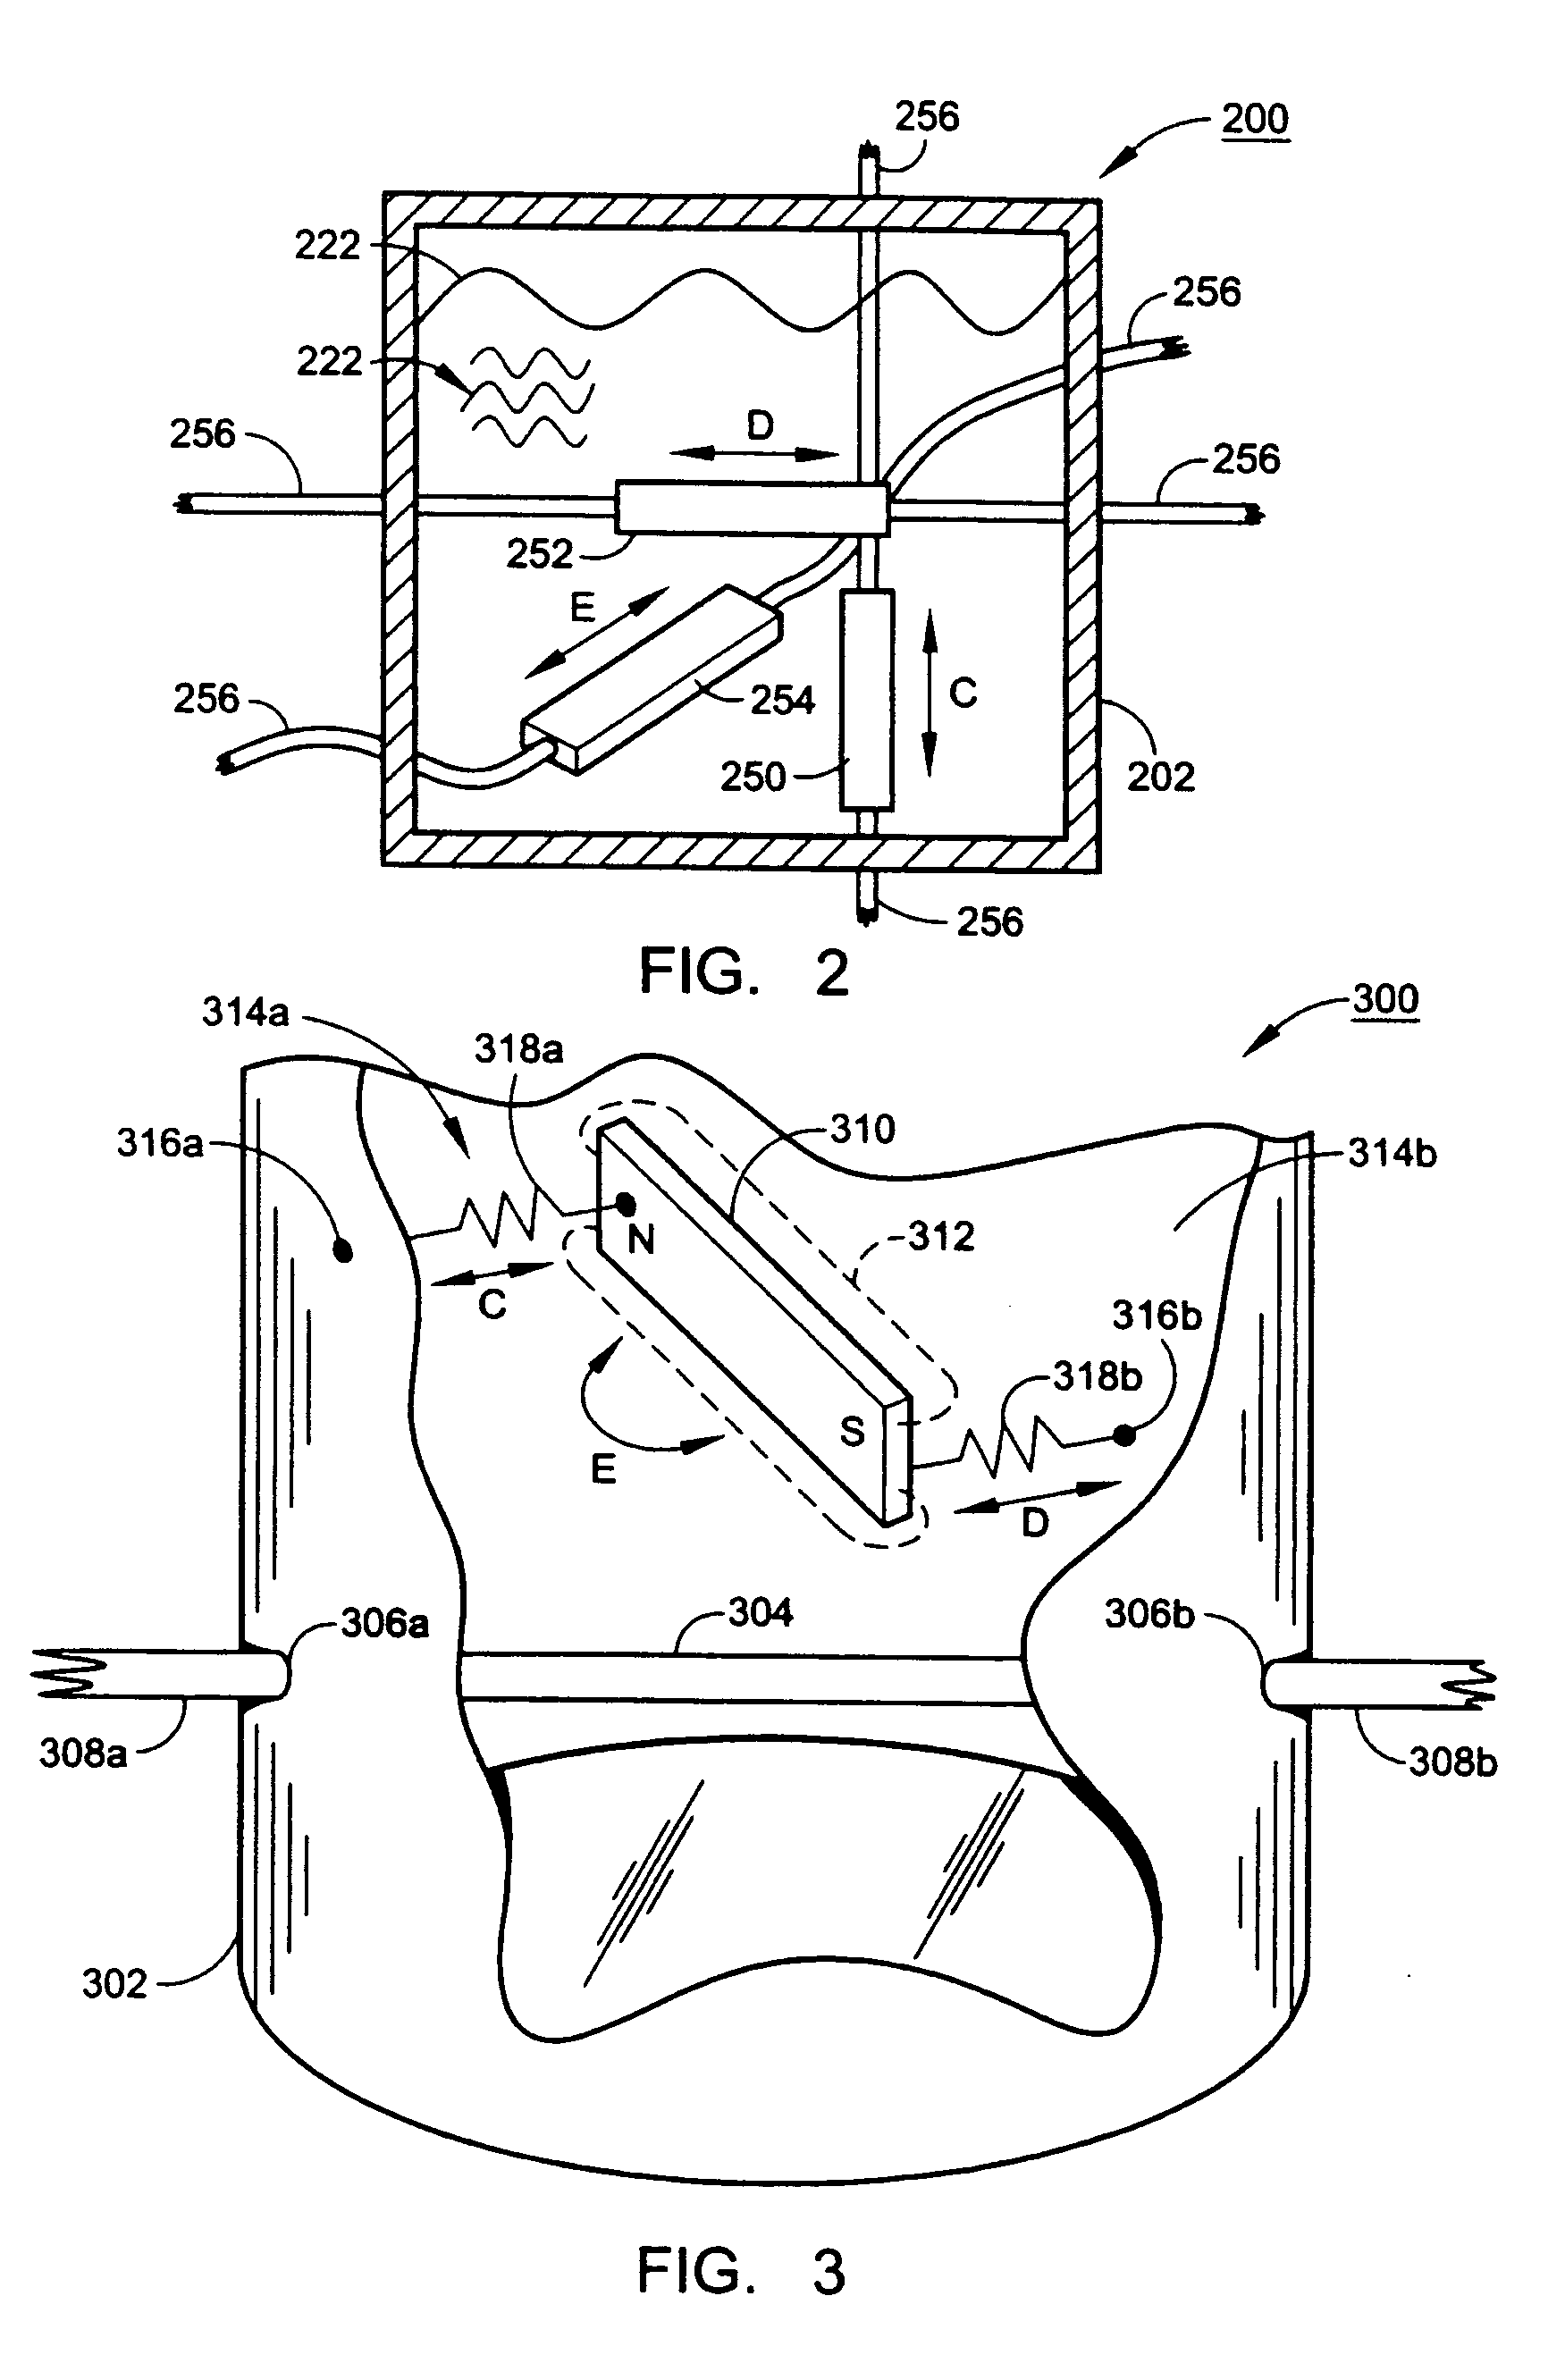 Transducer for converting between mechanical vibration and electrical signal